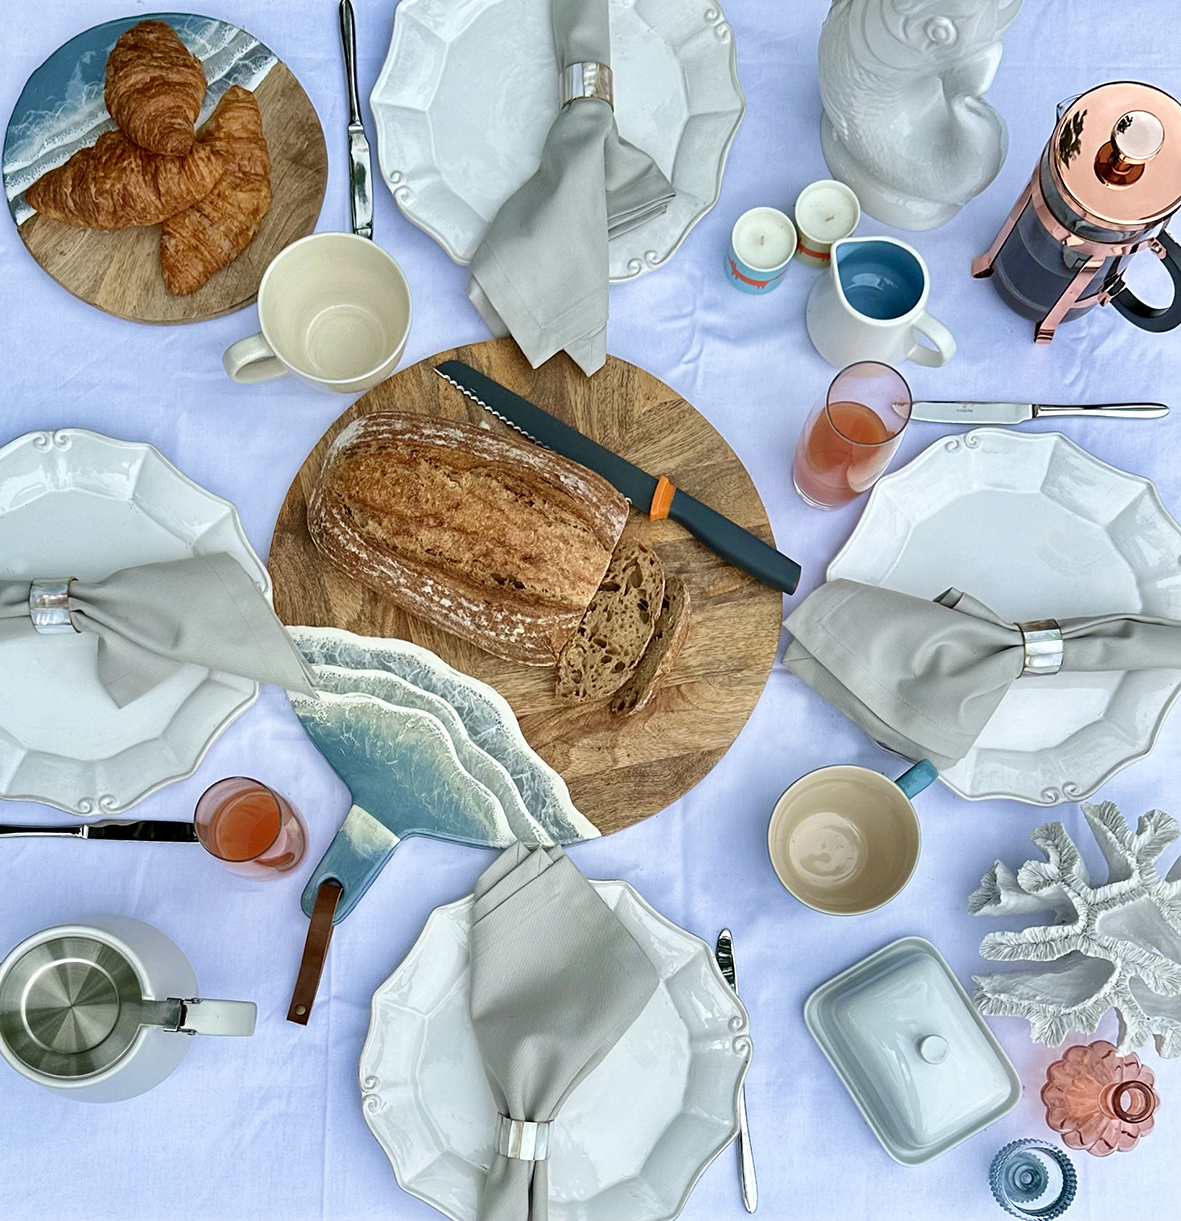 Flatlay for breakfast table setting designed by Emma Green for Style & Decor blogger Sarah